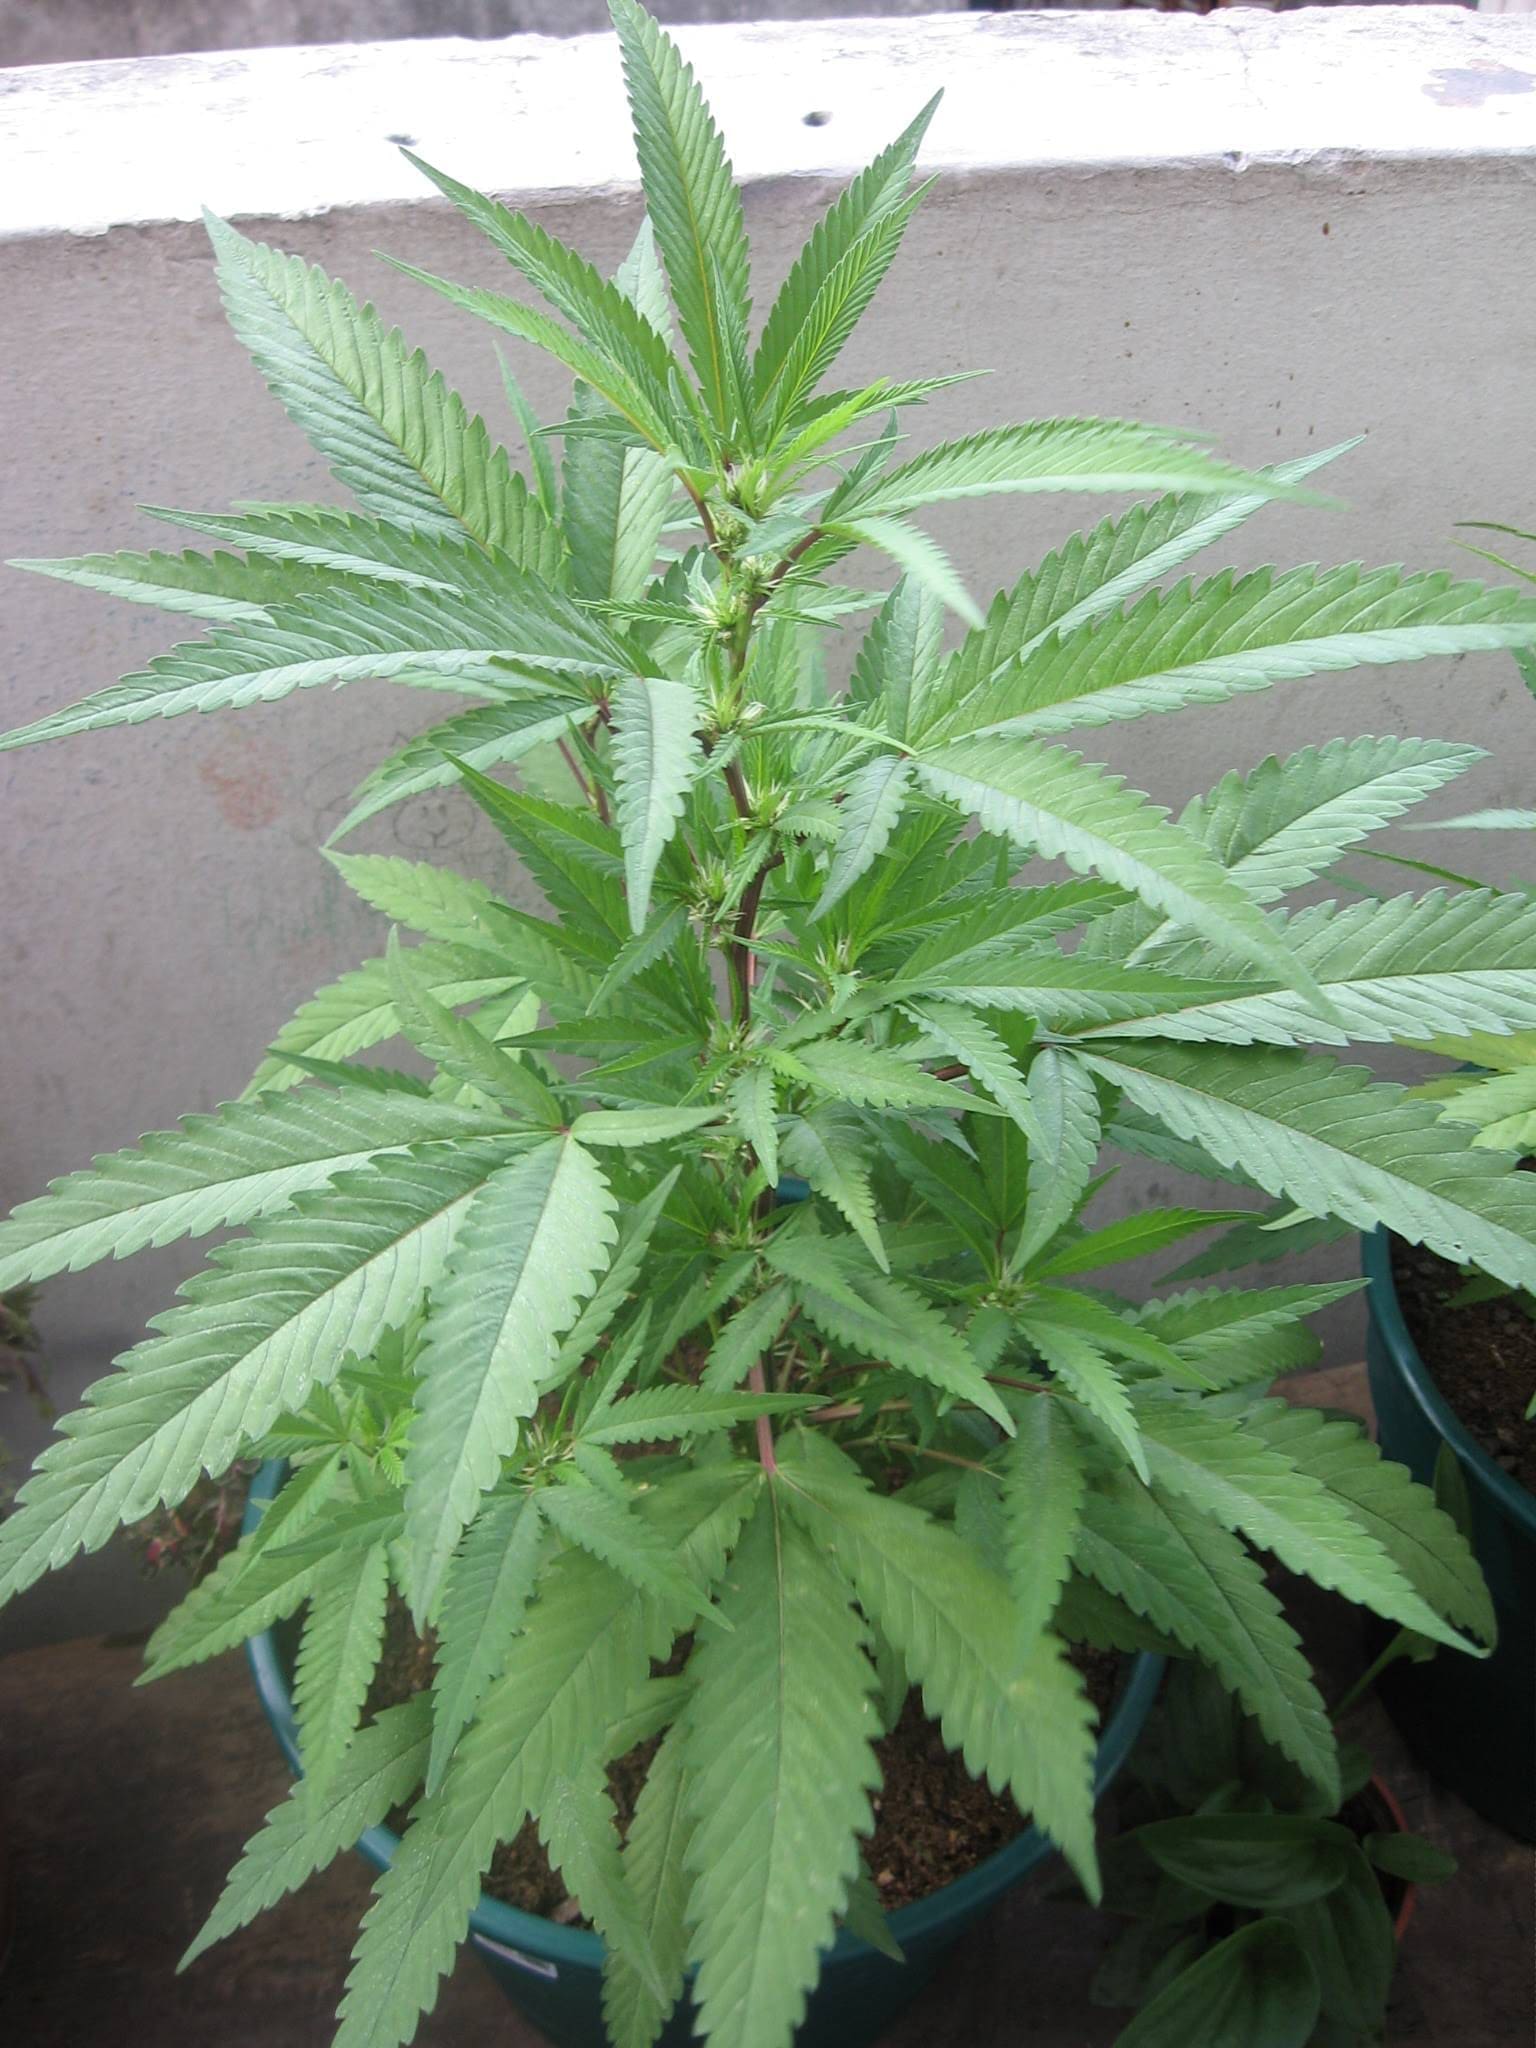 Vegetative stage in Cannabis plants